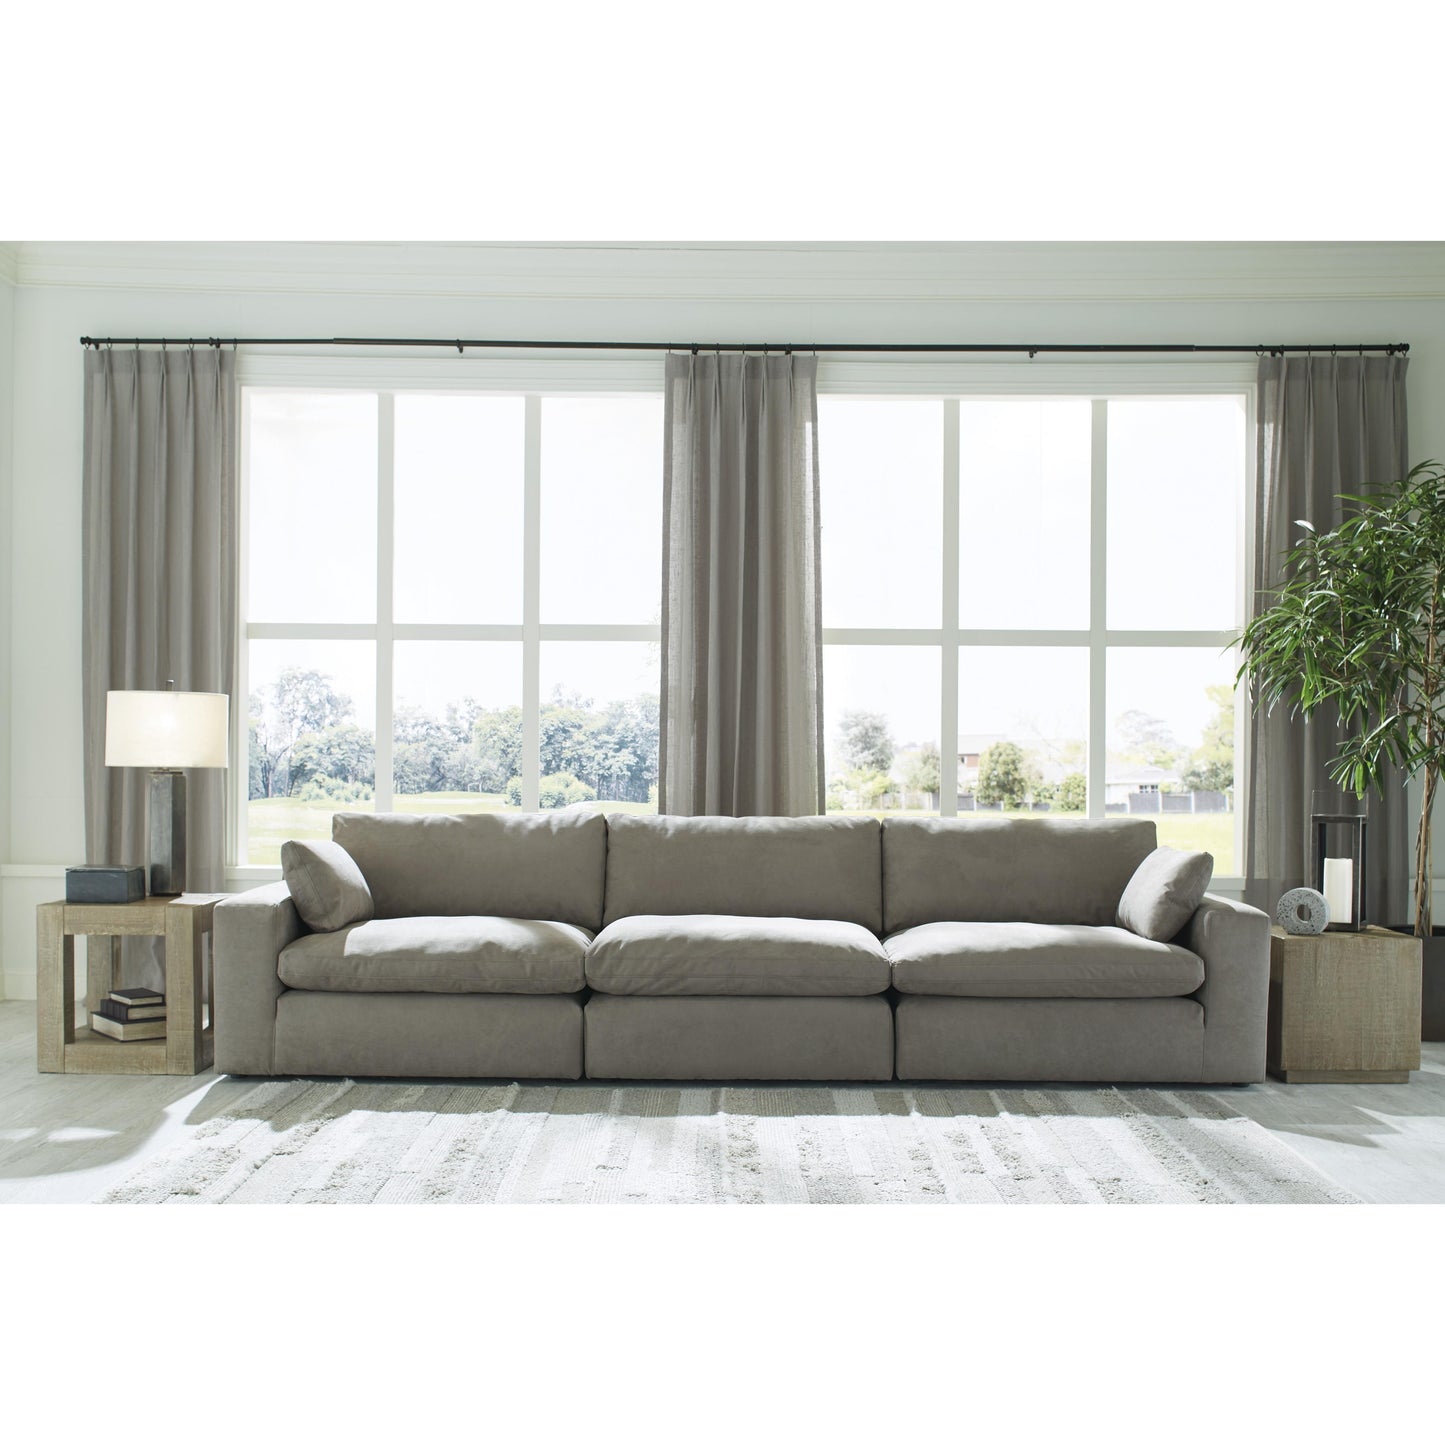 Signature Design by Ashley Next-Gen Gaucho Leather Look 3 pc Sectional 1540364/1540346/1540365 IMAGE 1